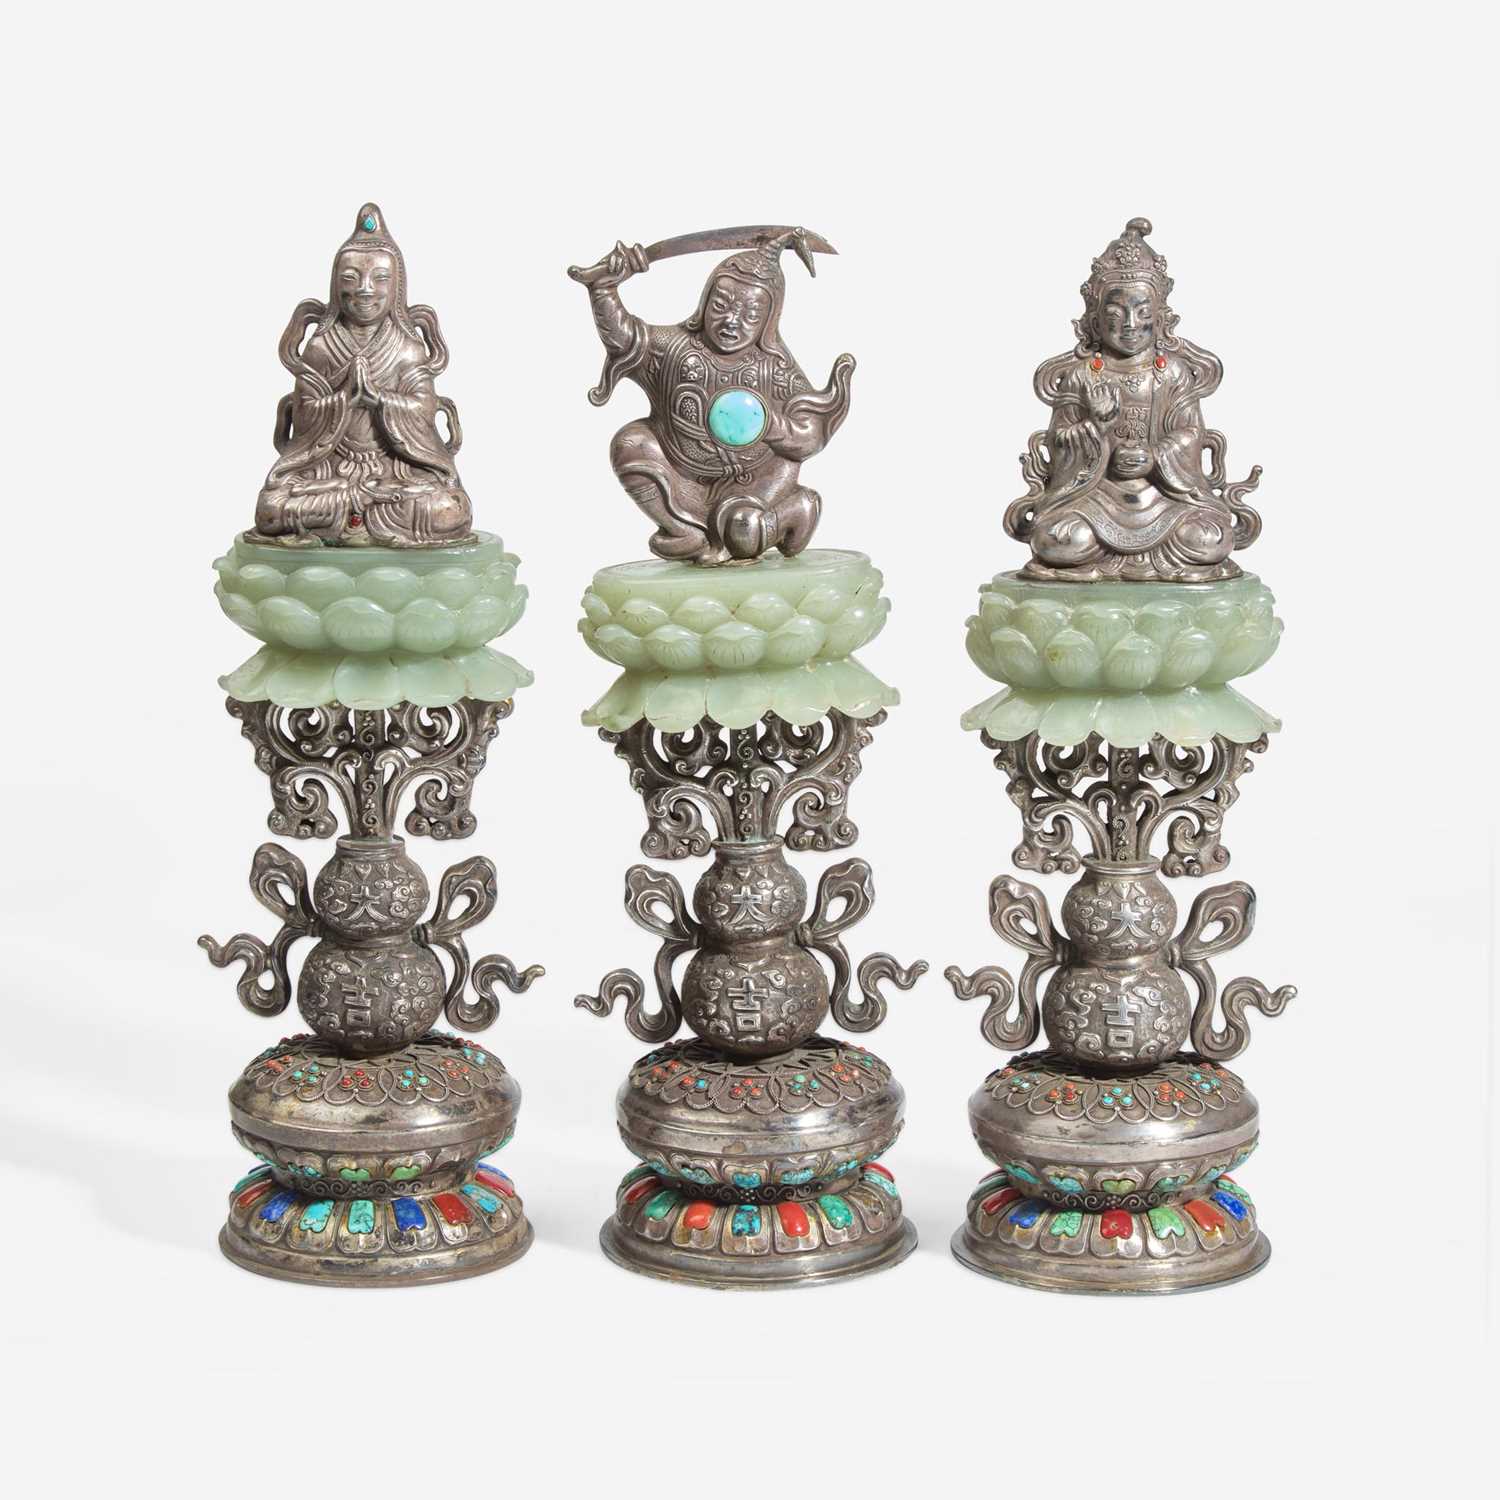 Fifteen Sino-Tibetan style embellished jade and silver alloy altar ornaments - Image 3 of 3